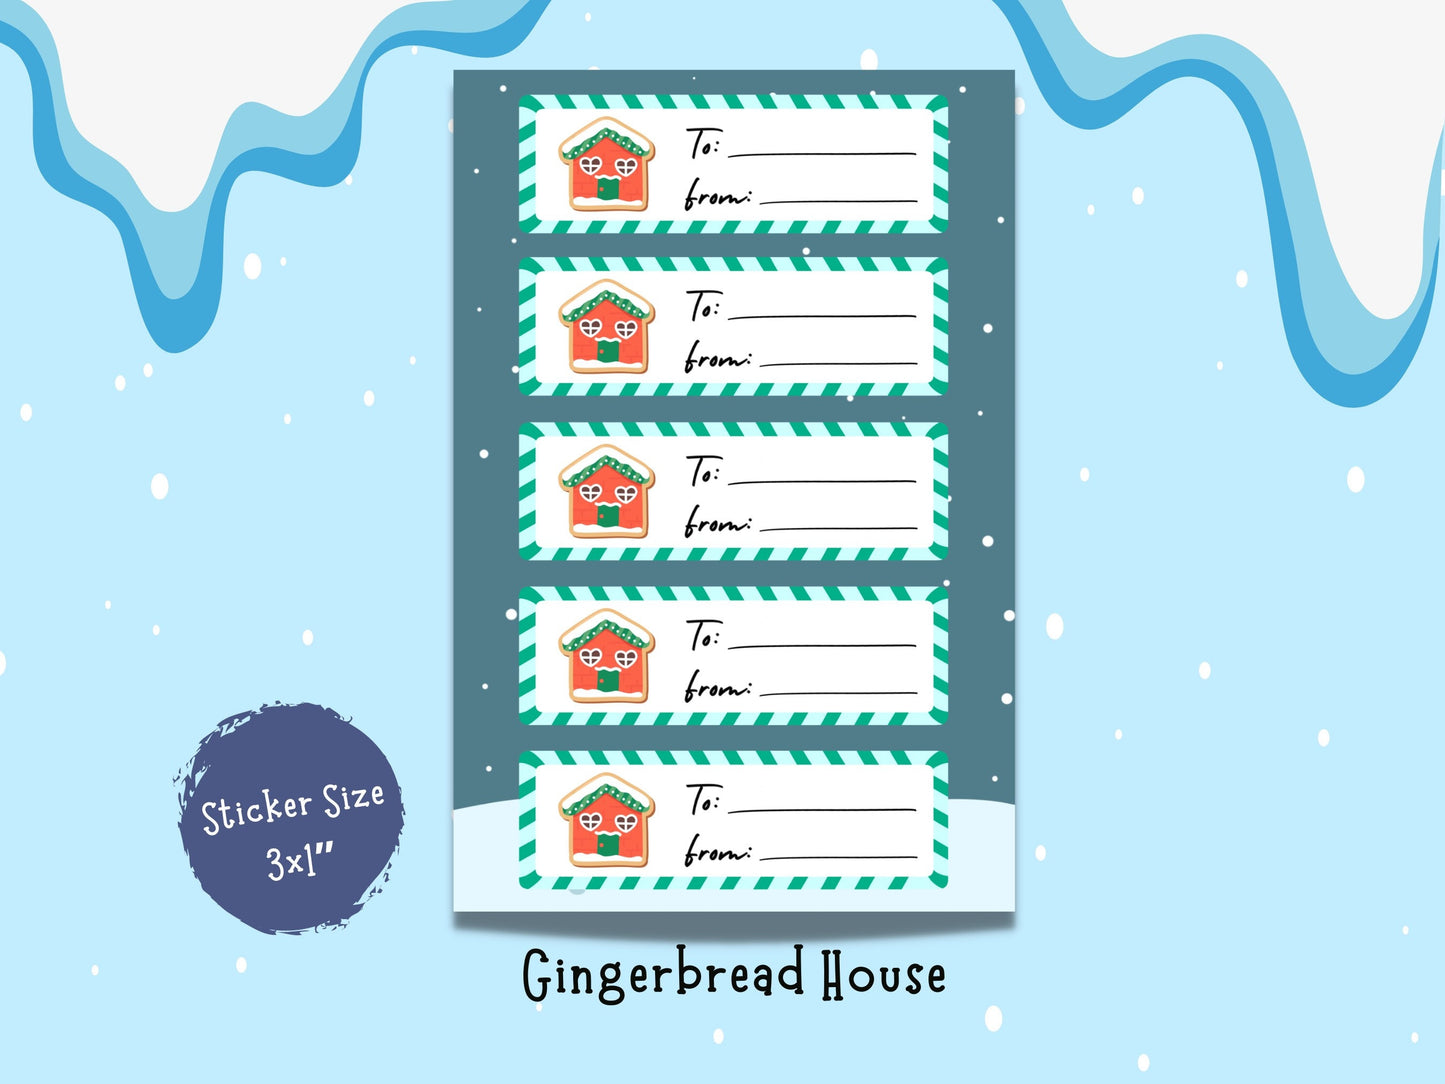 Christmas Gift Tags Present Labels for Gifts To And From